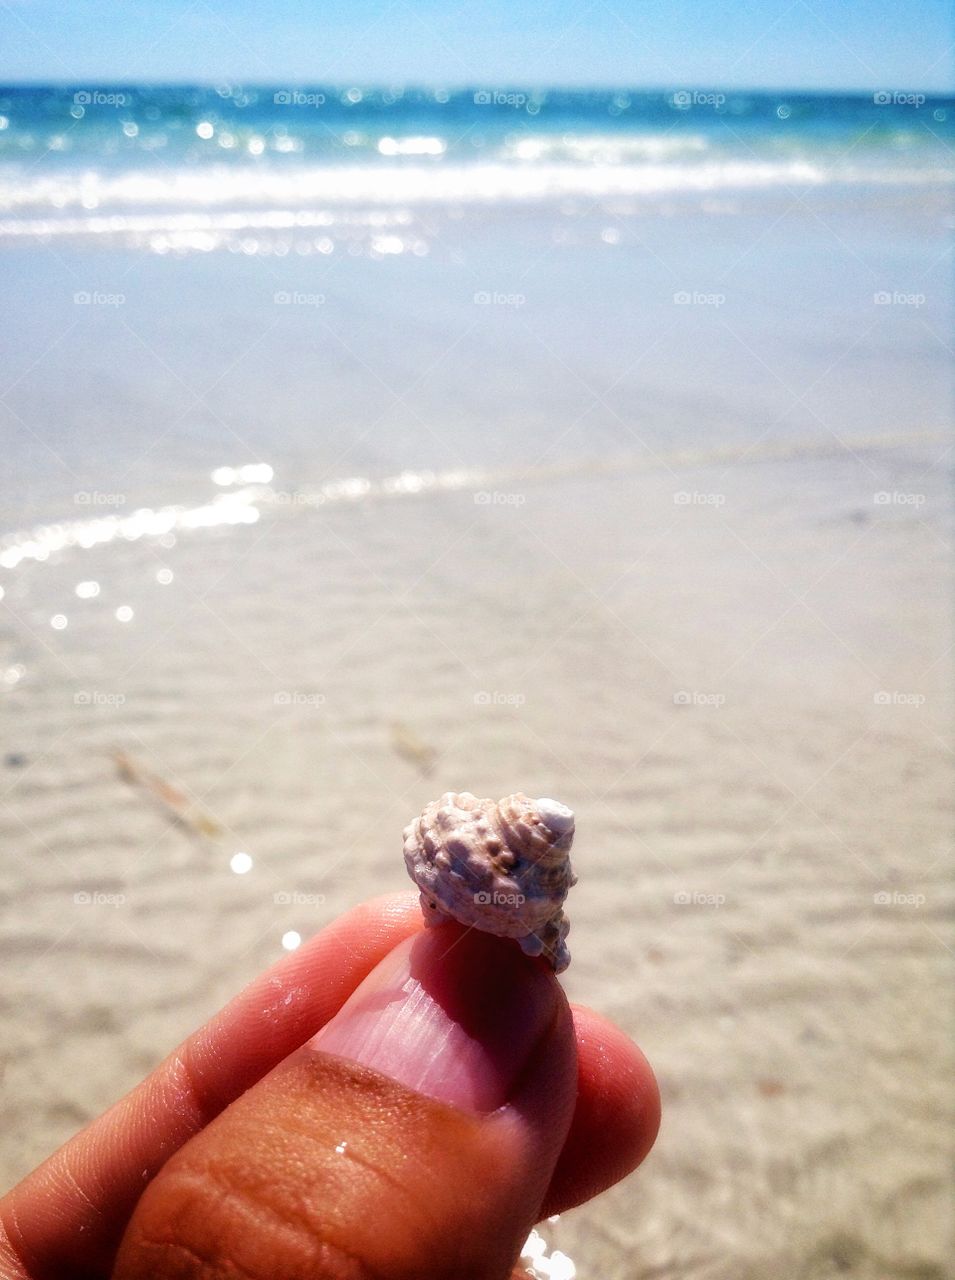 A shell just for you...